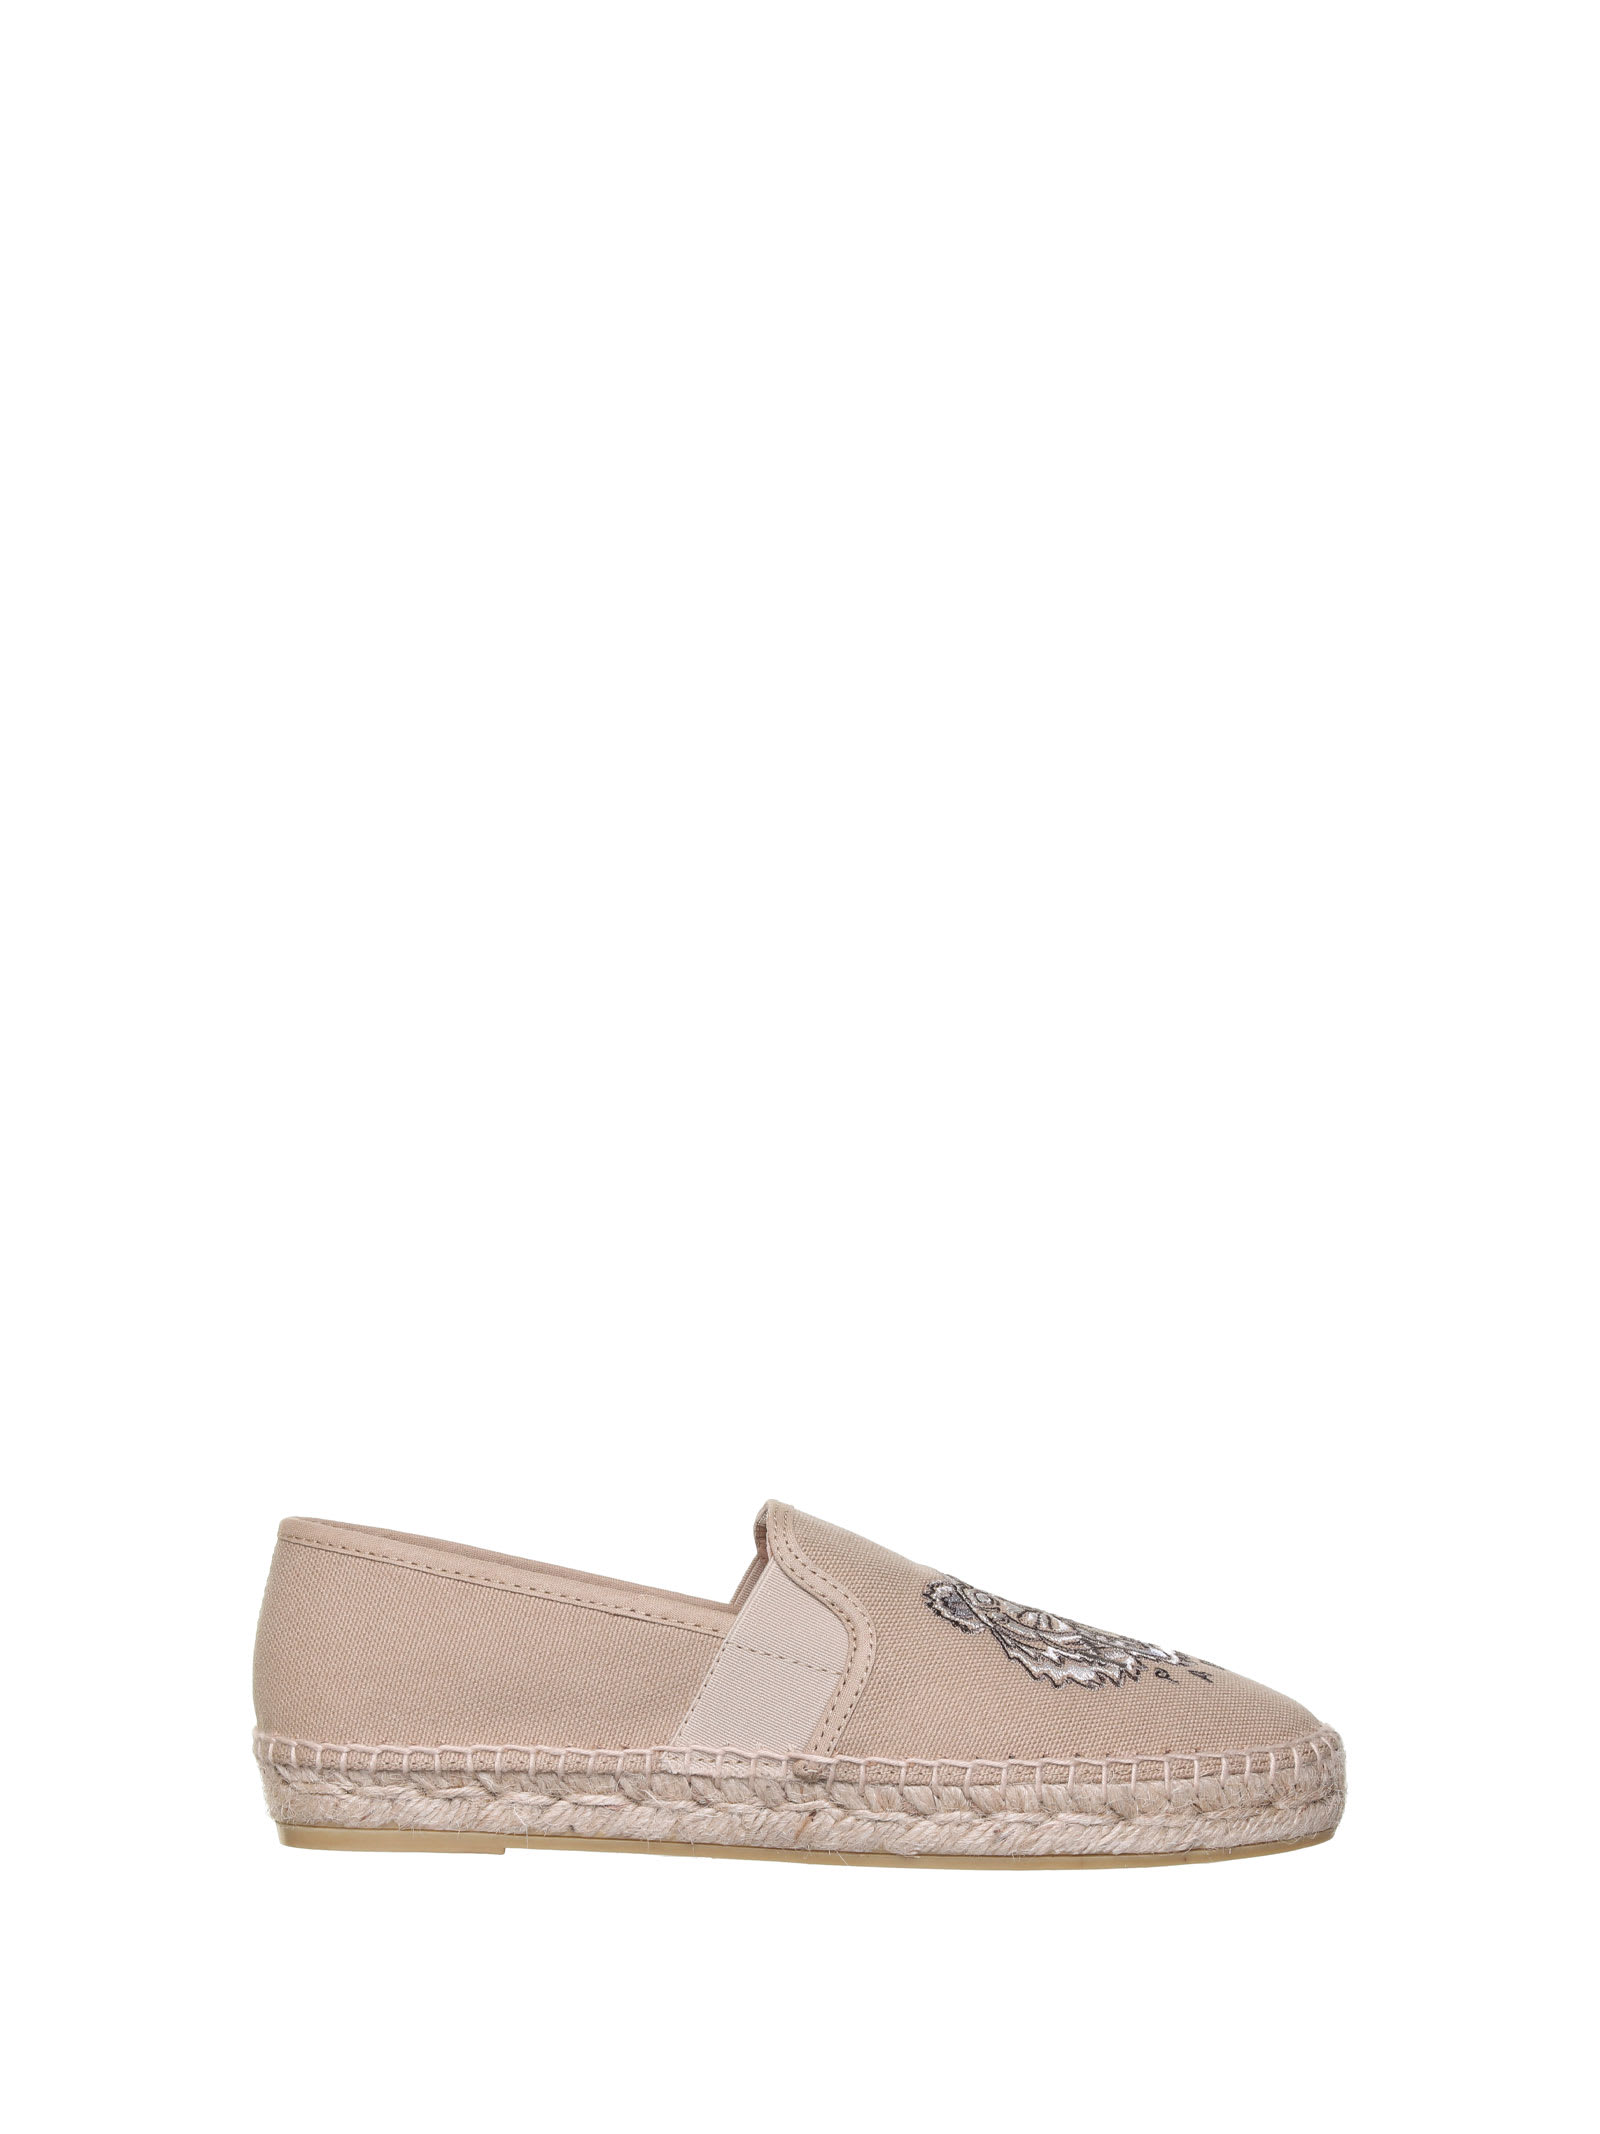 Buy Kenzo Kenzo Espadrilles Tiger In Canvas online, shop Kenzo shoes with free shipping